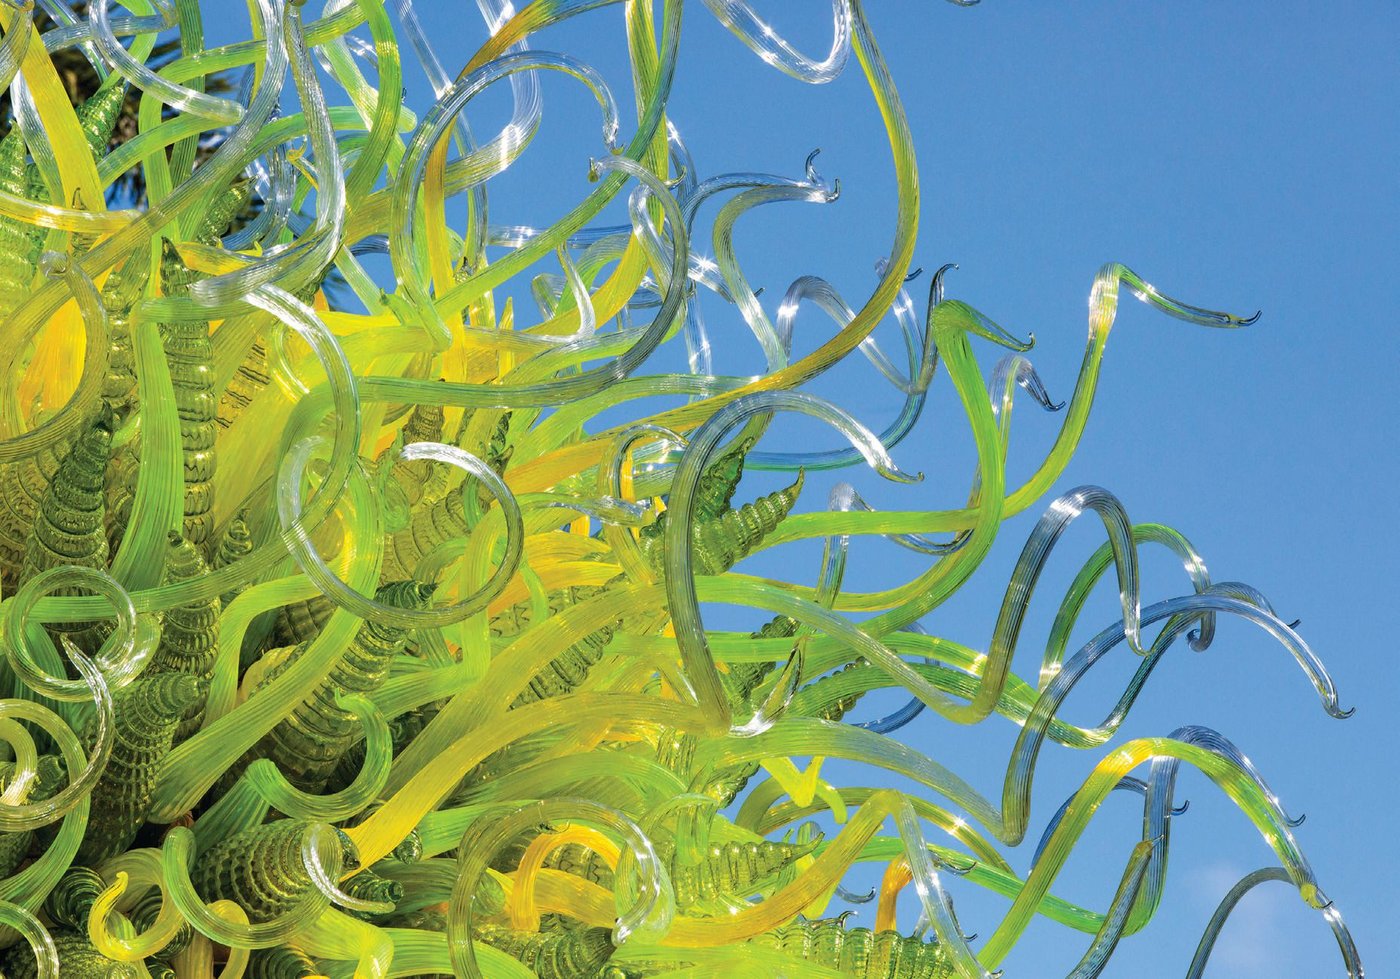 A detail of Dale Chihuly’s “Sol del Citrón” piece, as seen at Fairchild Tropical Botanic Garden in Coral Gables, Fla. PHOTO BY SCOTT MITCHELL LEEN; DALE CHIHULY, “SOL DEL CITRÓN” (DETAIL) (2014), 15 FEET BY 14.5 FEET BY 14 FEET, FAIRCHILD TROPICAL BOTANIC GARDEN, CORAL GABLES, FLA., © 2021 CHIHULY STUDIO. ALL RIGHTS RESERVED